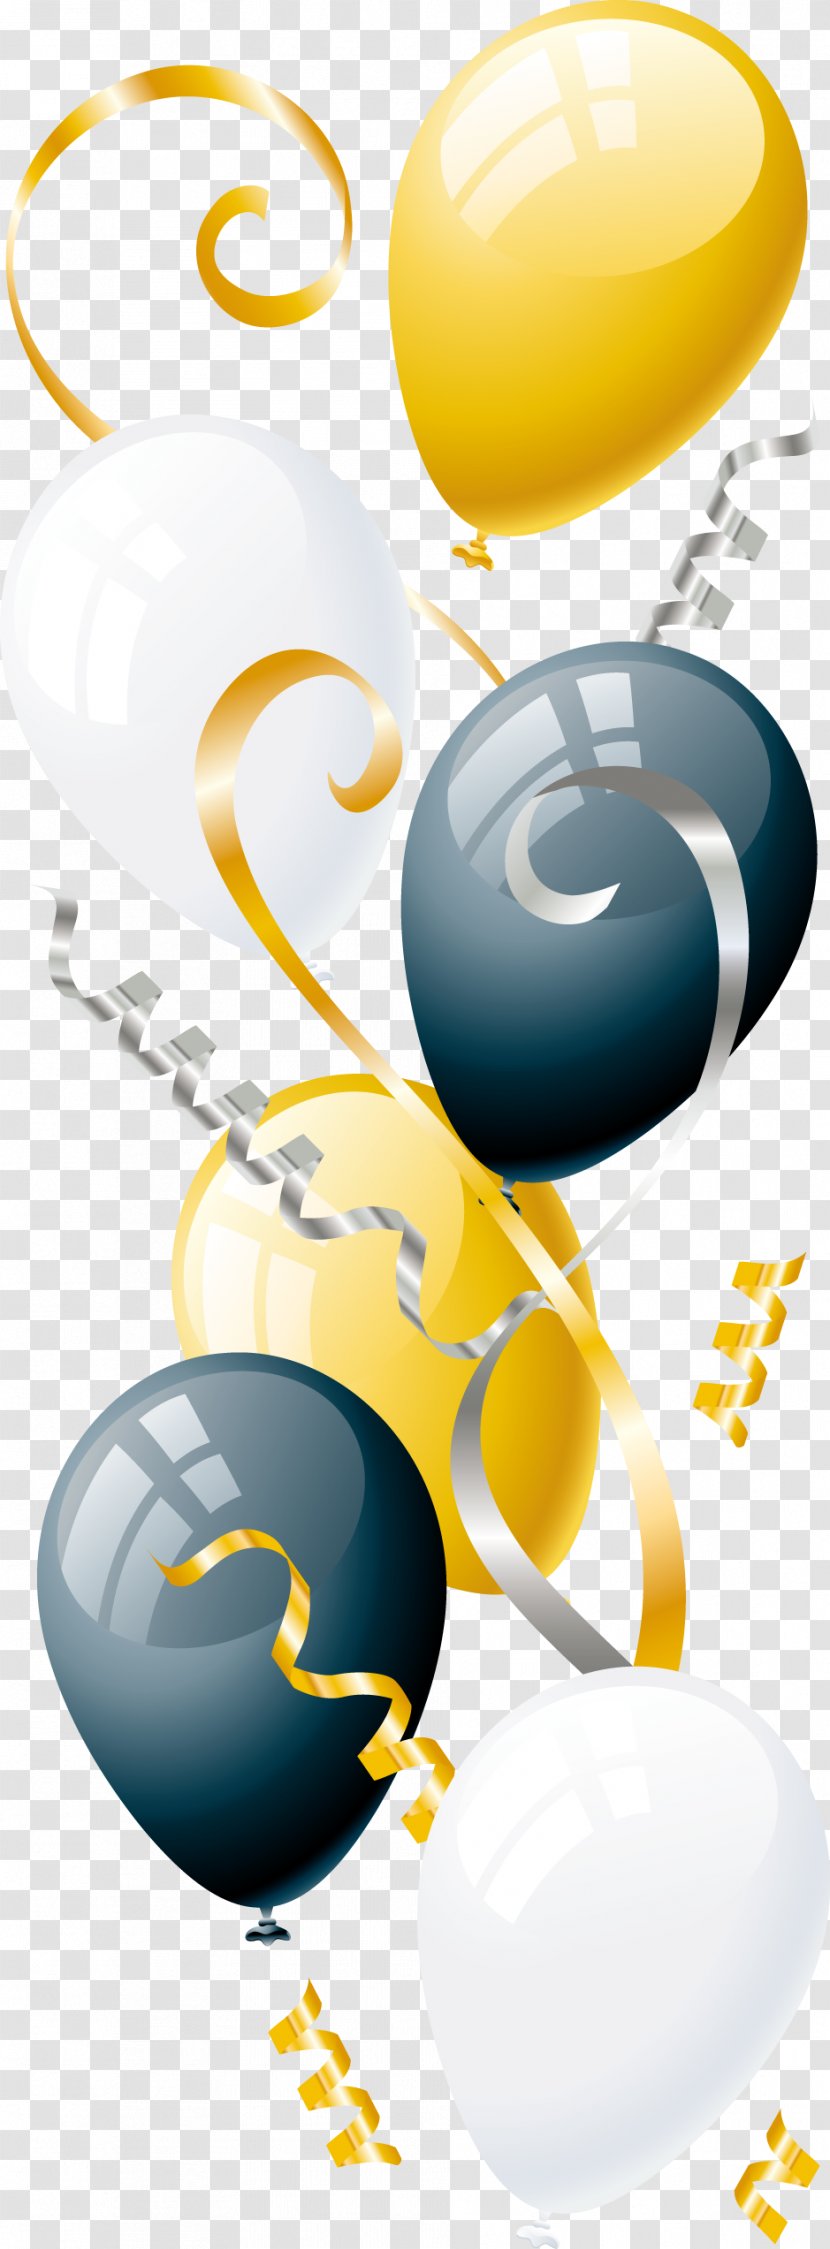 Toy Balloon Birthday Clip Art - Yellow Transparent PNG